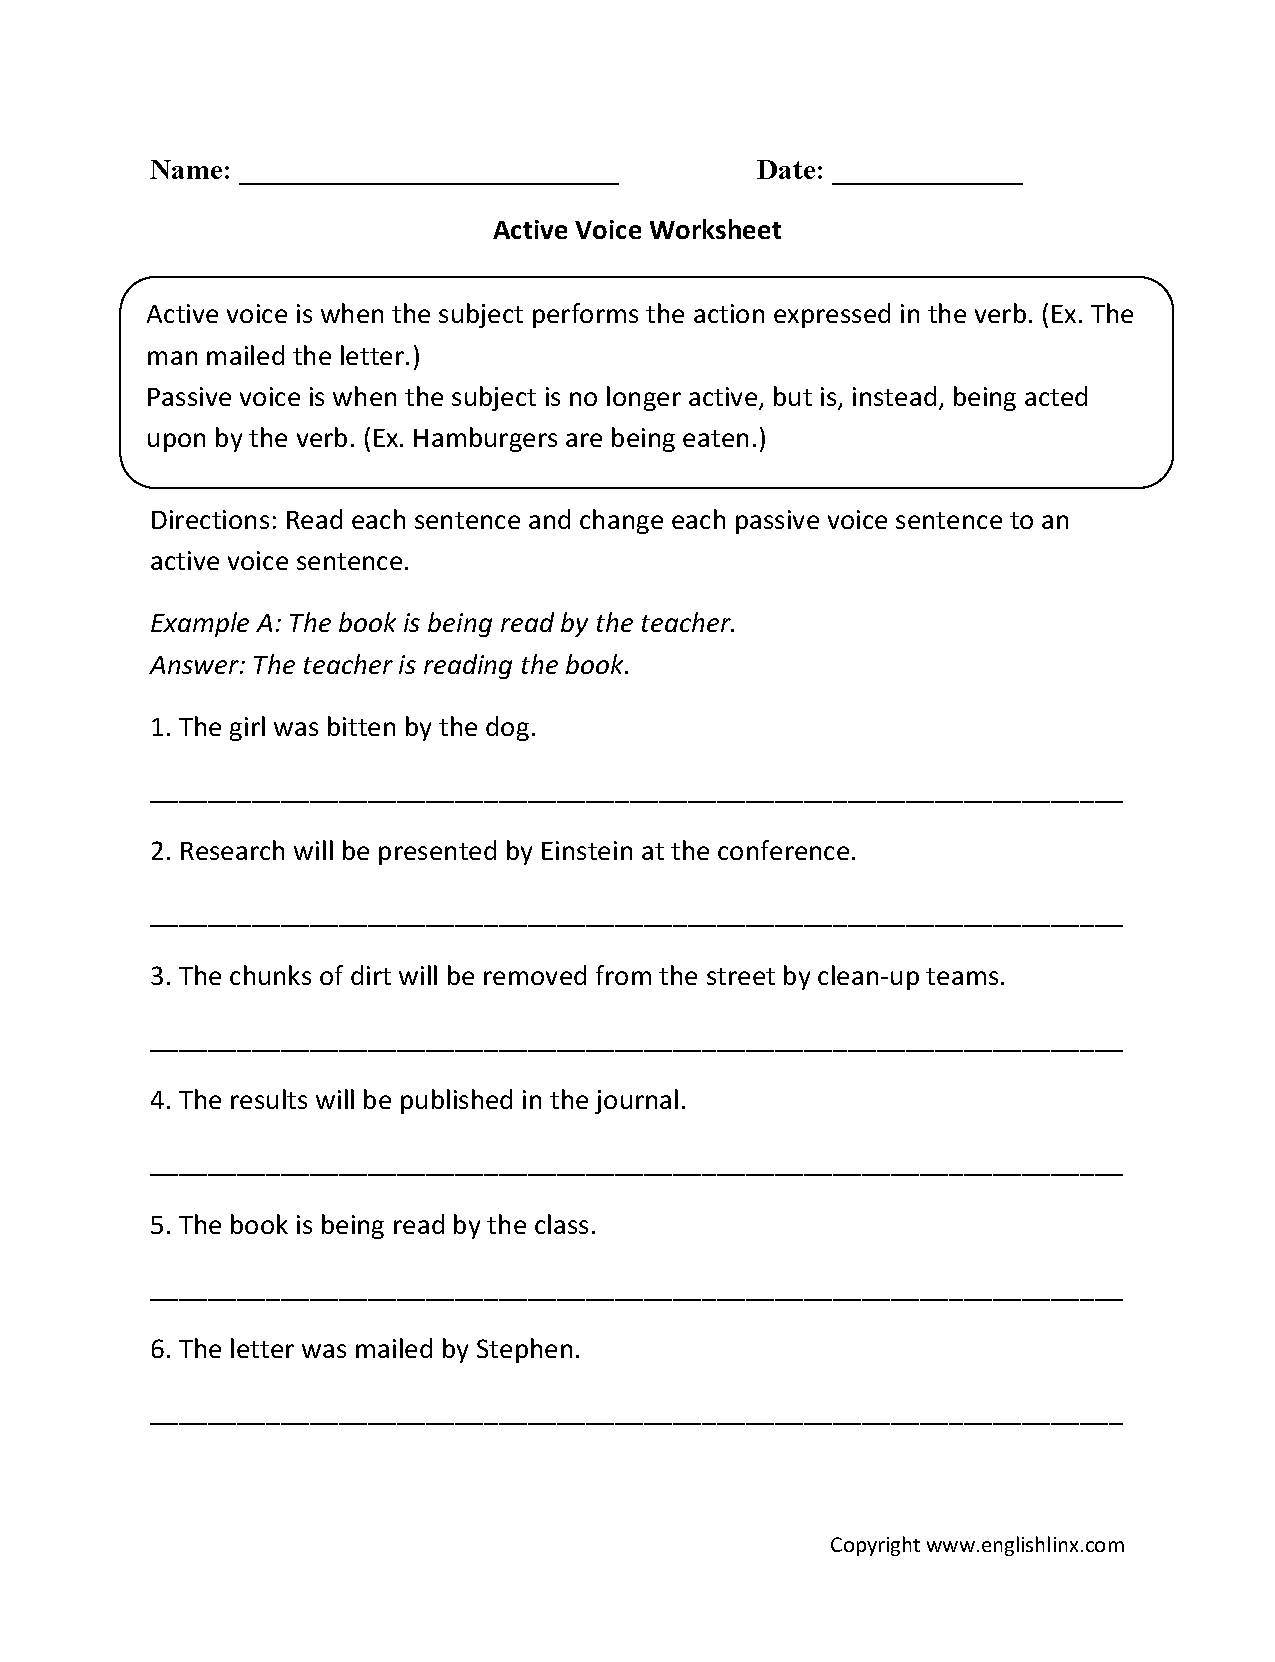 englishlinx-active-and-passive-voice-worksheets